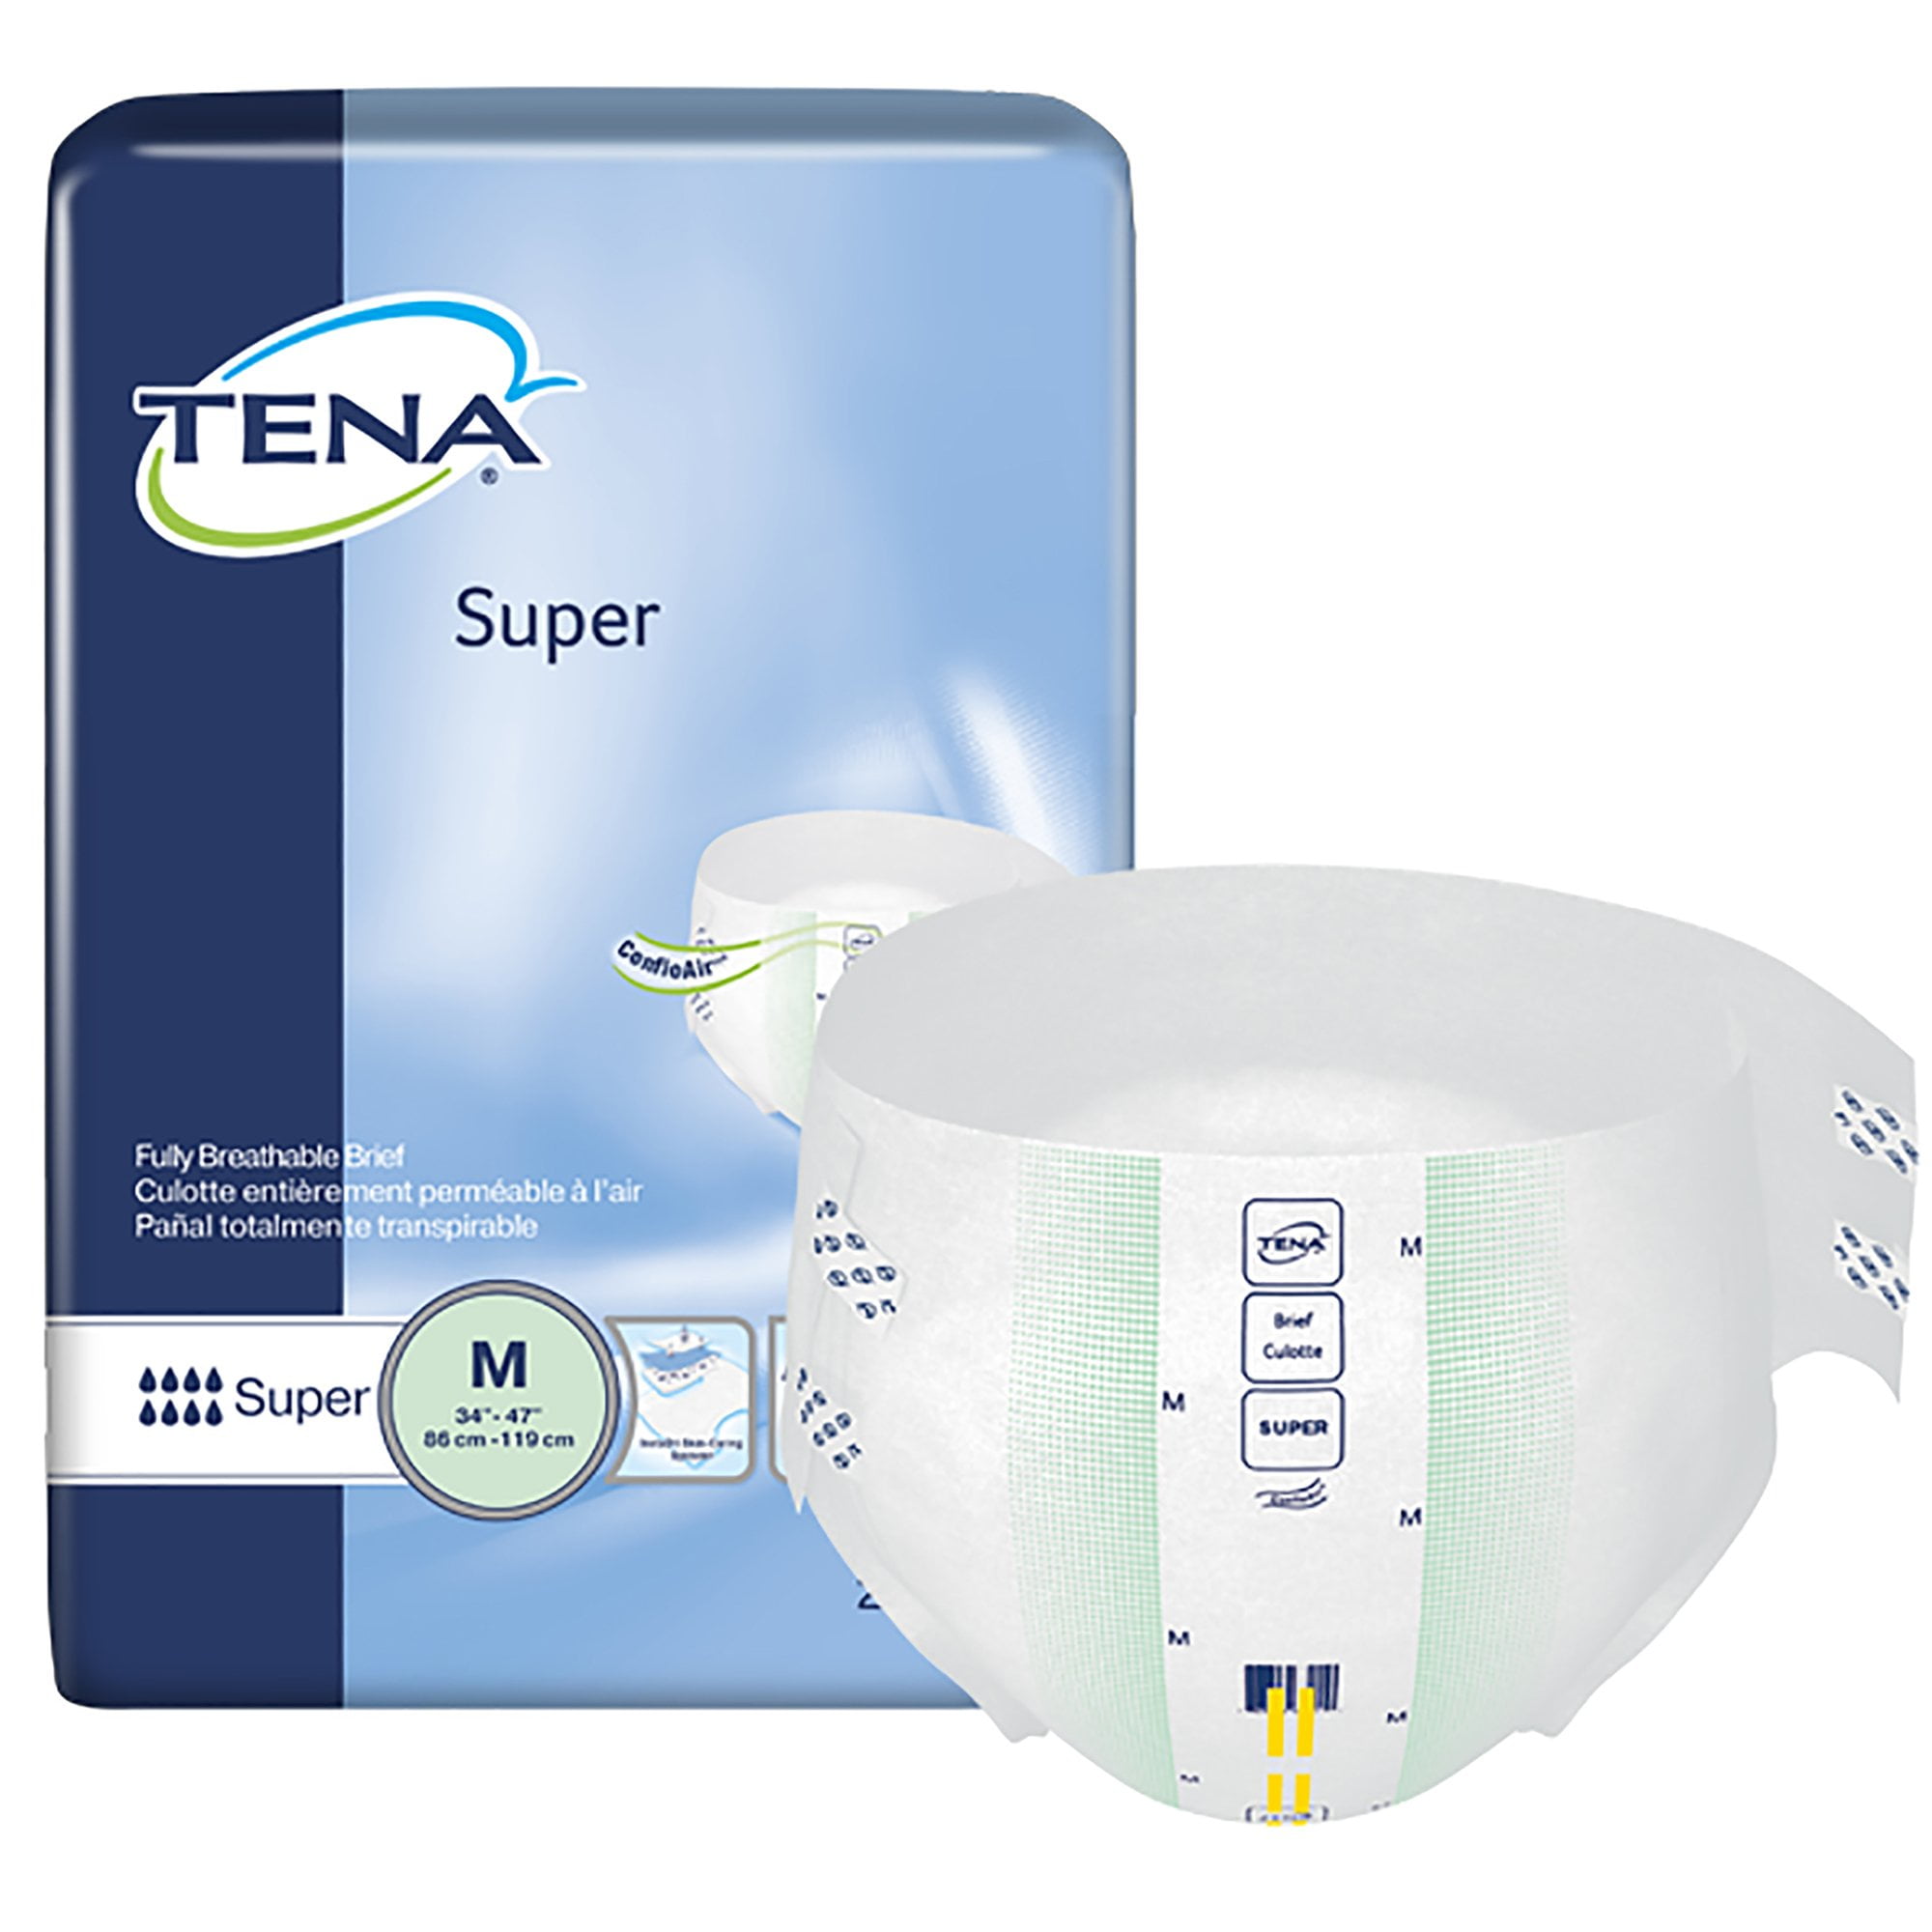 TENA Super Adult Incontinence Brief M Heavy Absorbency Overnight, 67401 ...